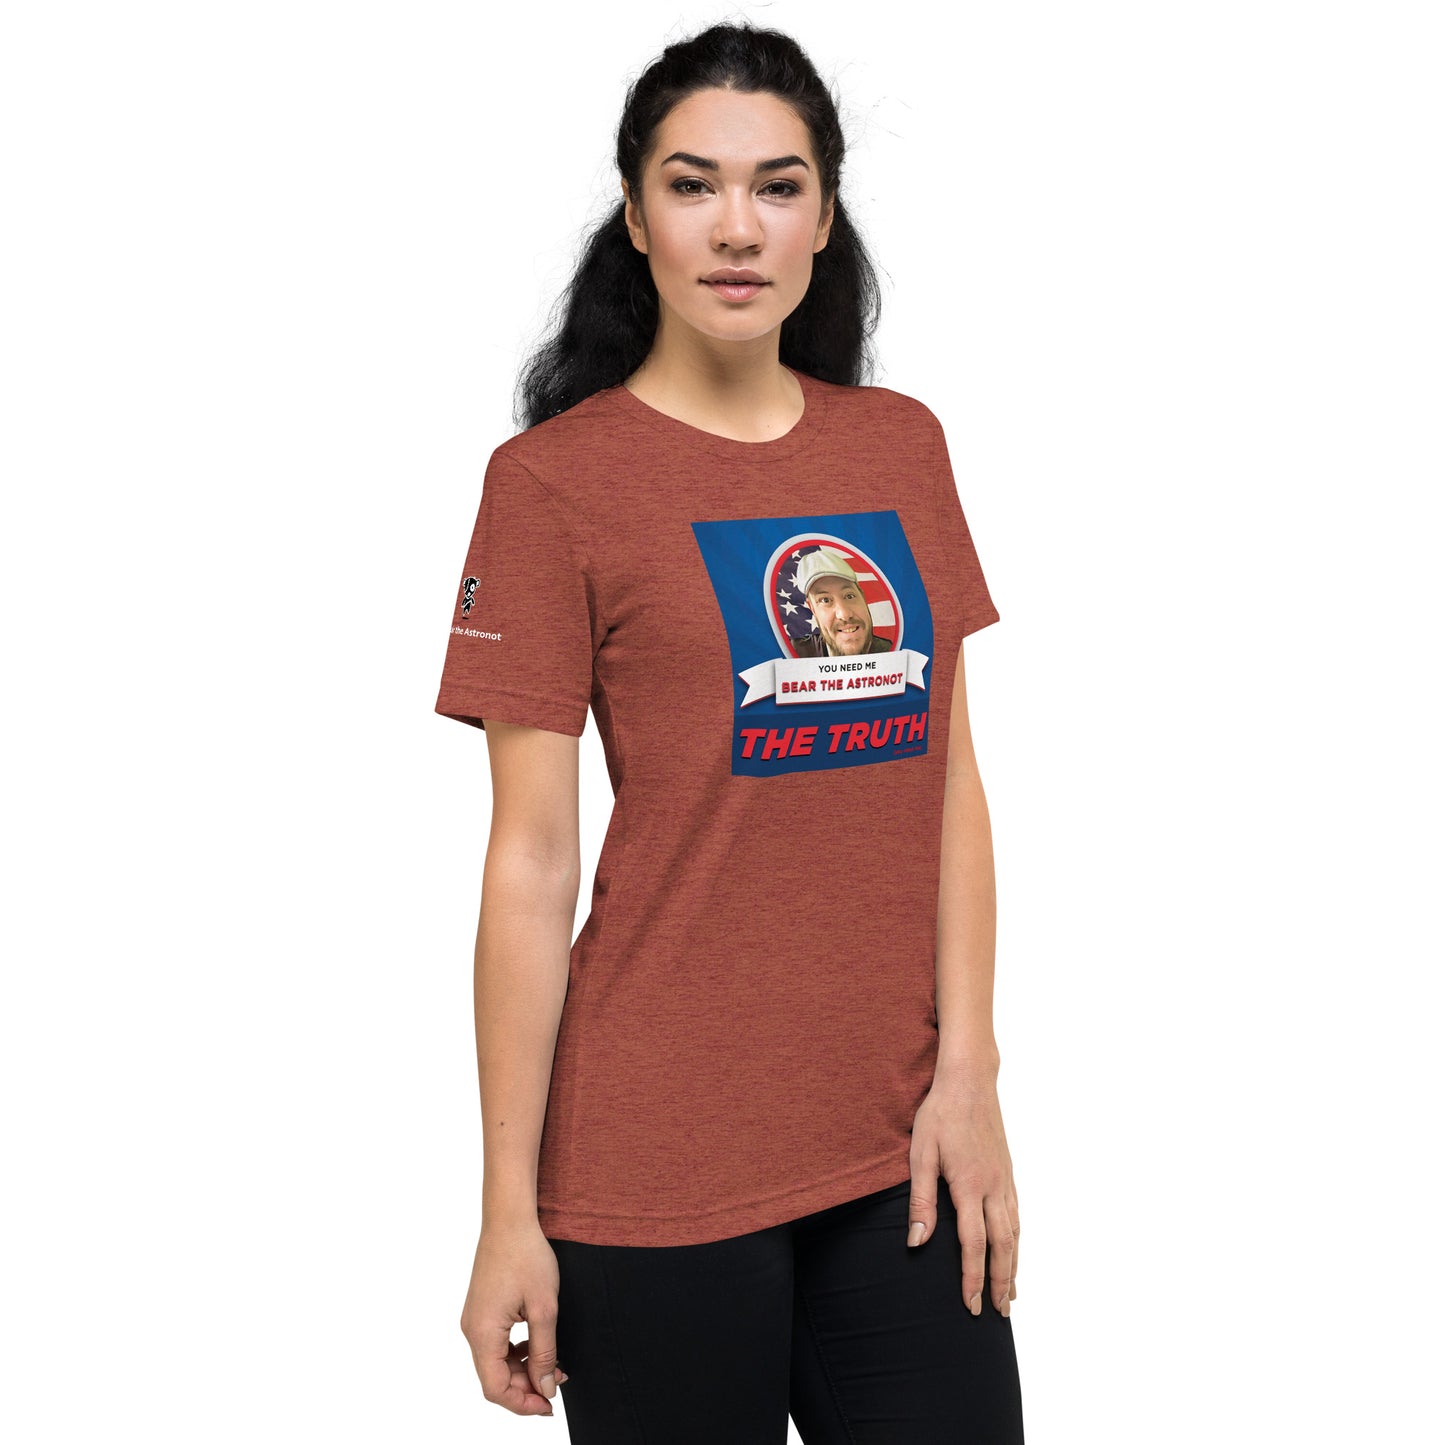 Bear the Astronot The Truth T-shirt